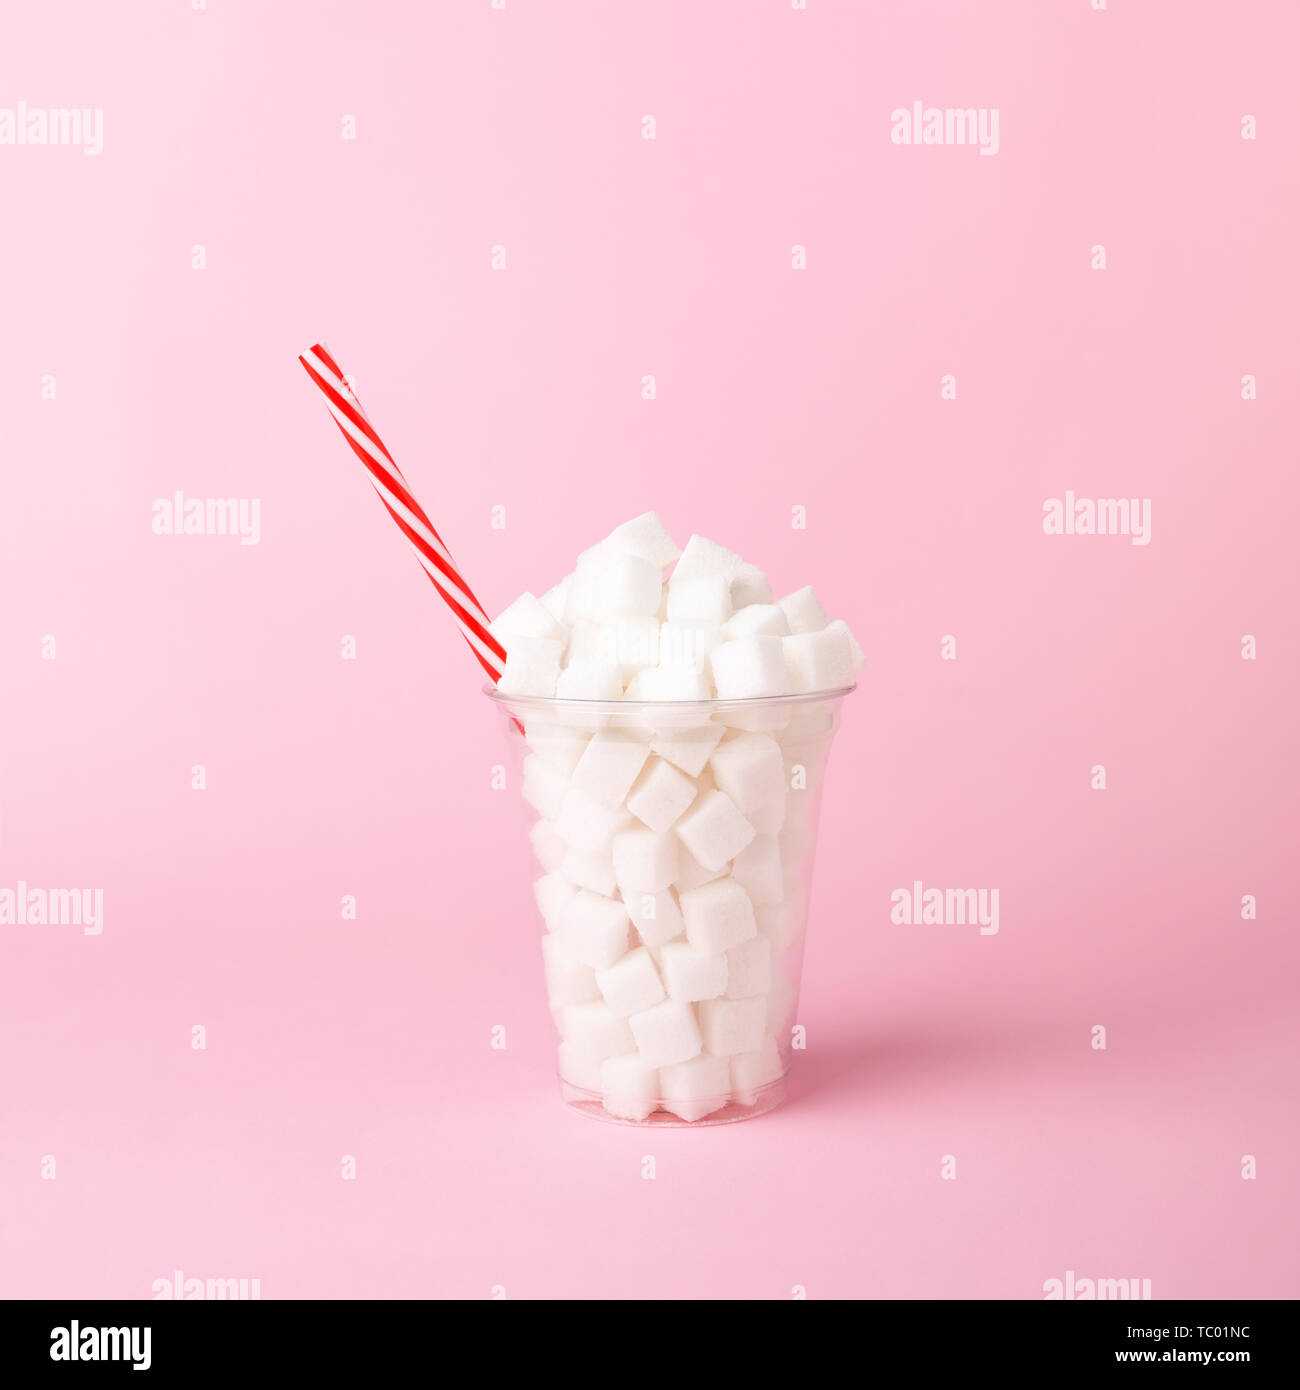 Plastic shake glass with straw full of sugar cubes on pastel pink background. Unhealthy drink concept. Minimal, vertical, side view. Stock Photo